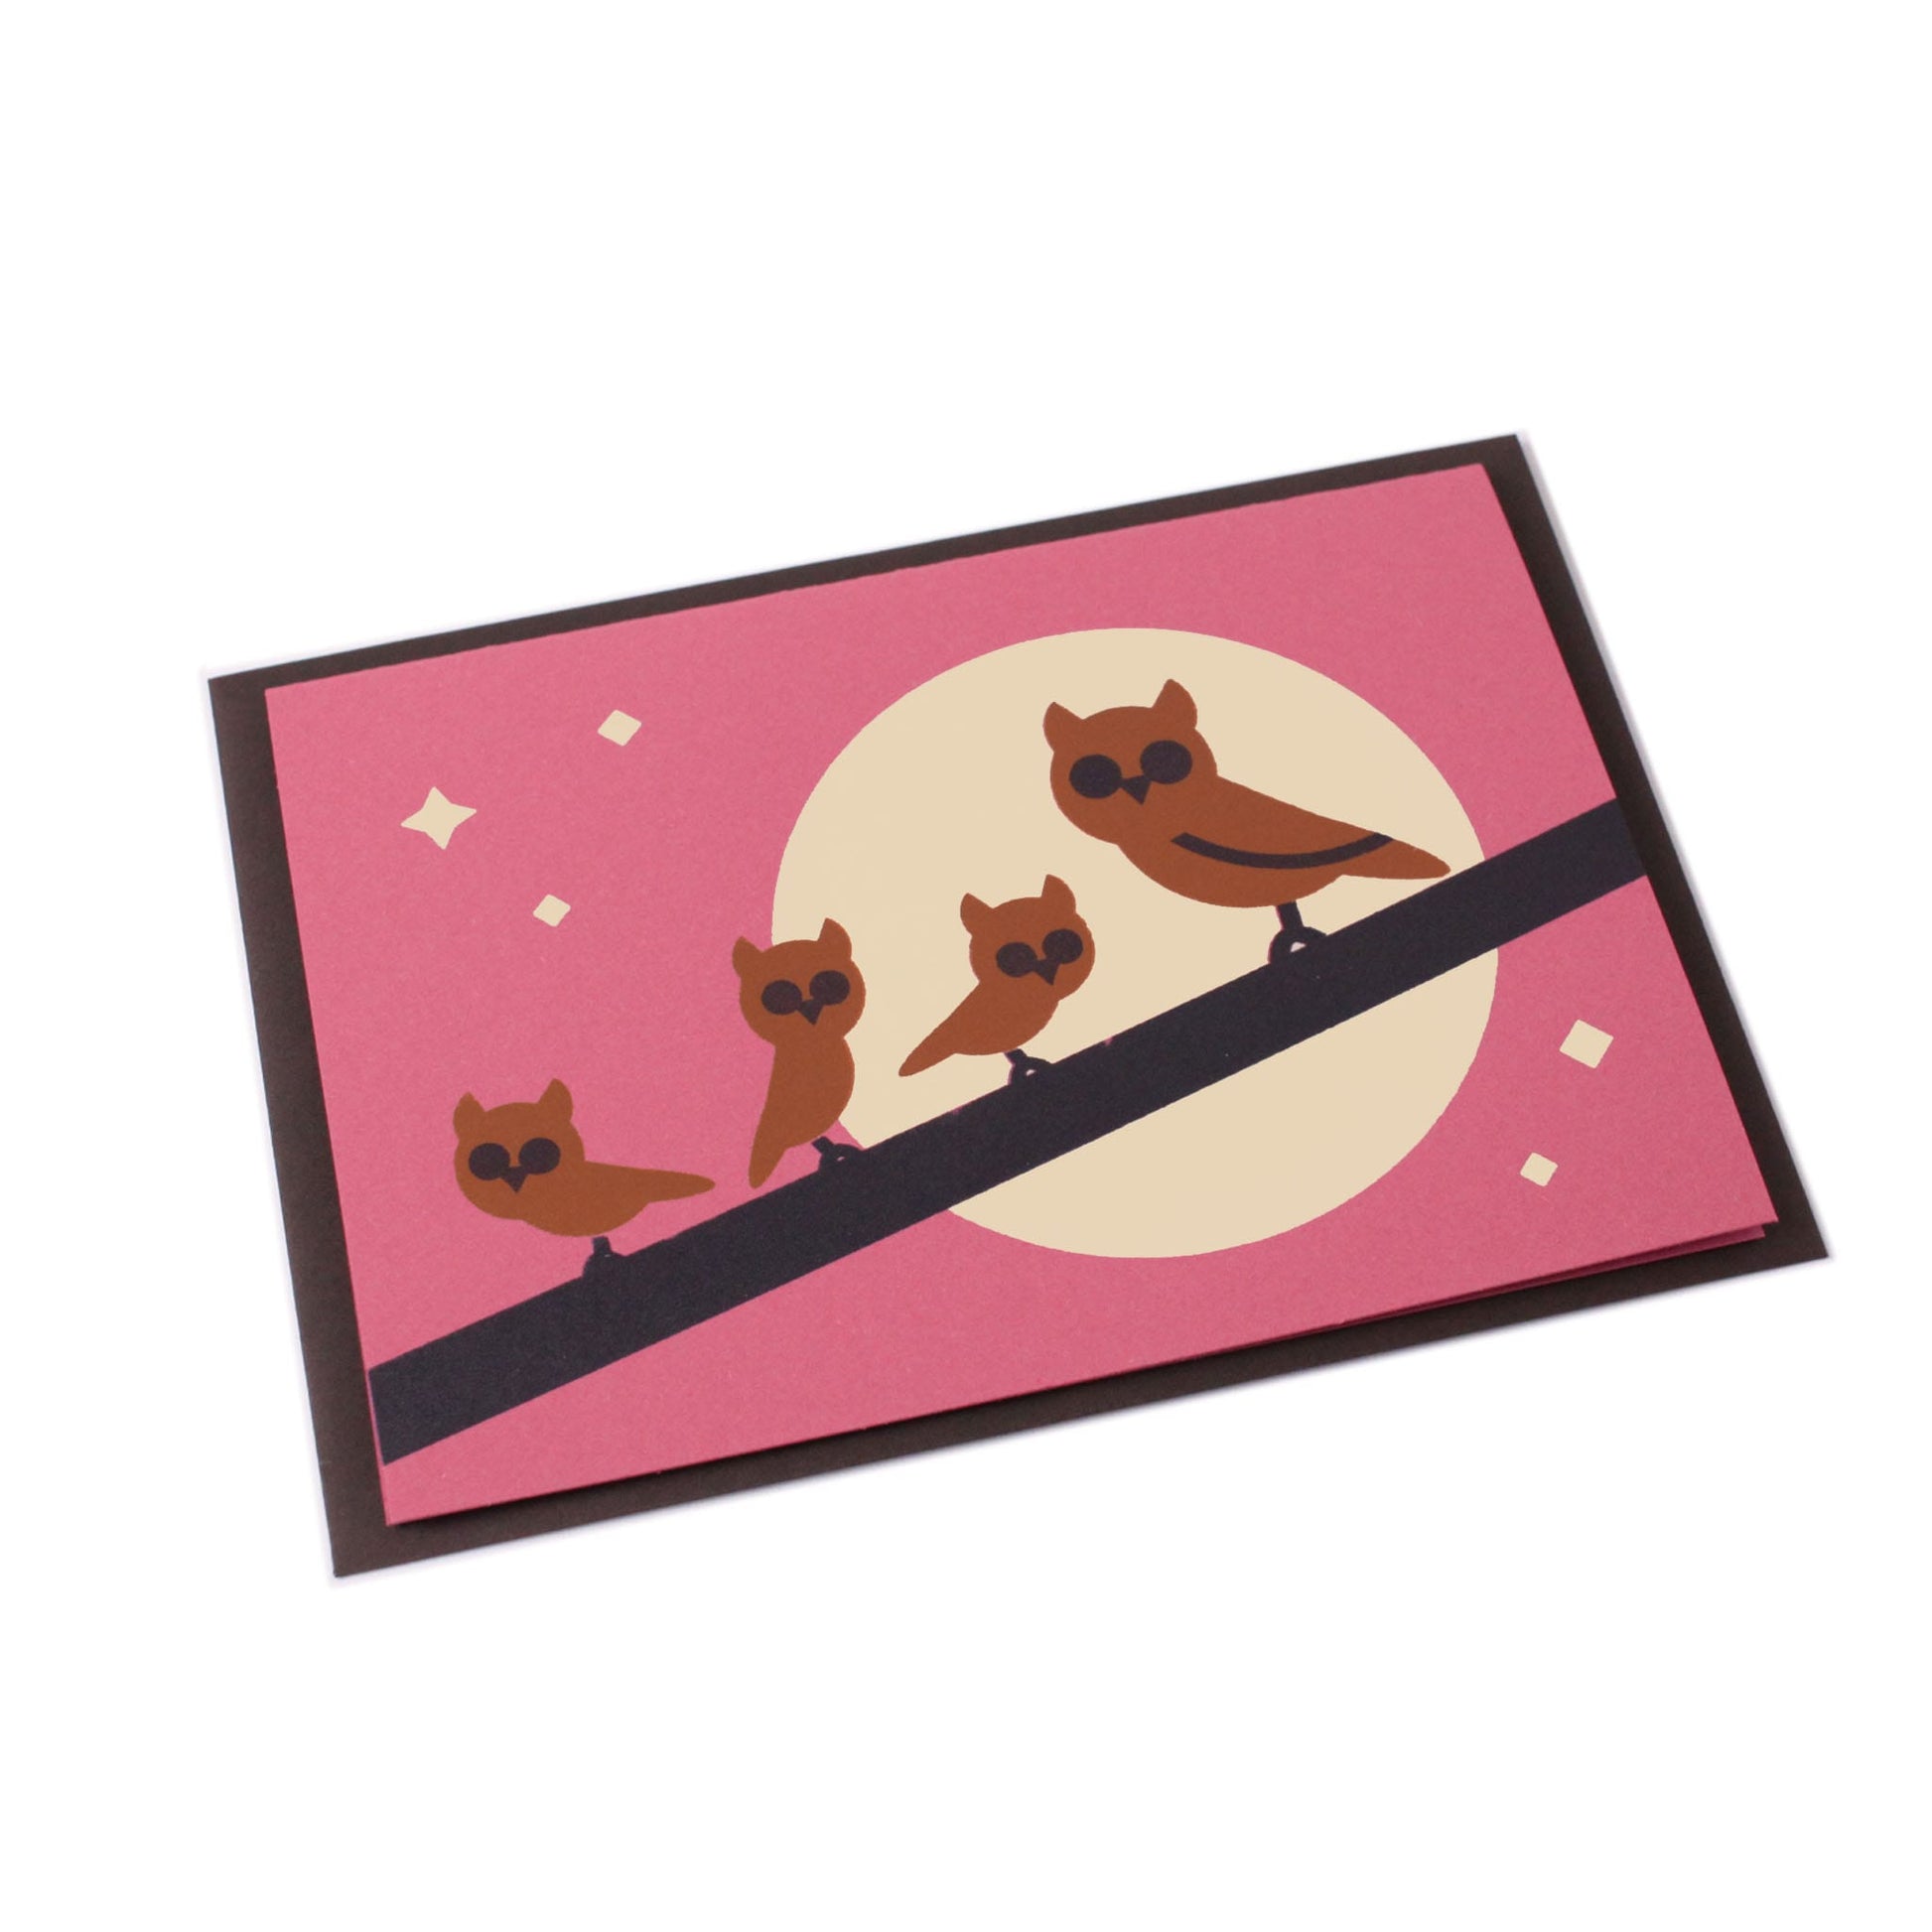 A tilted magenta-purple greeting card with an illustration of a branch with one big and three small brown owls and a moon with stars in the background. Behind the card is a dark brown envelope.